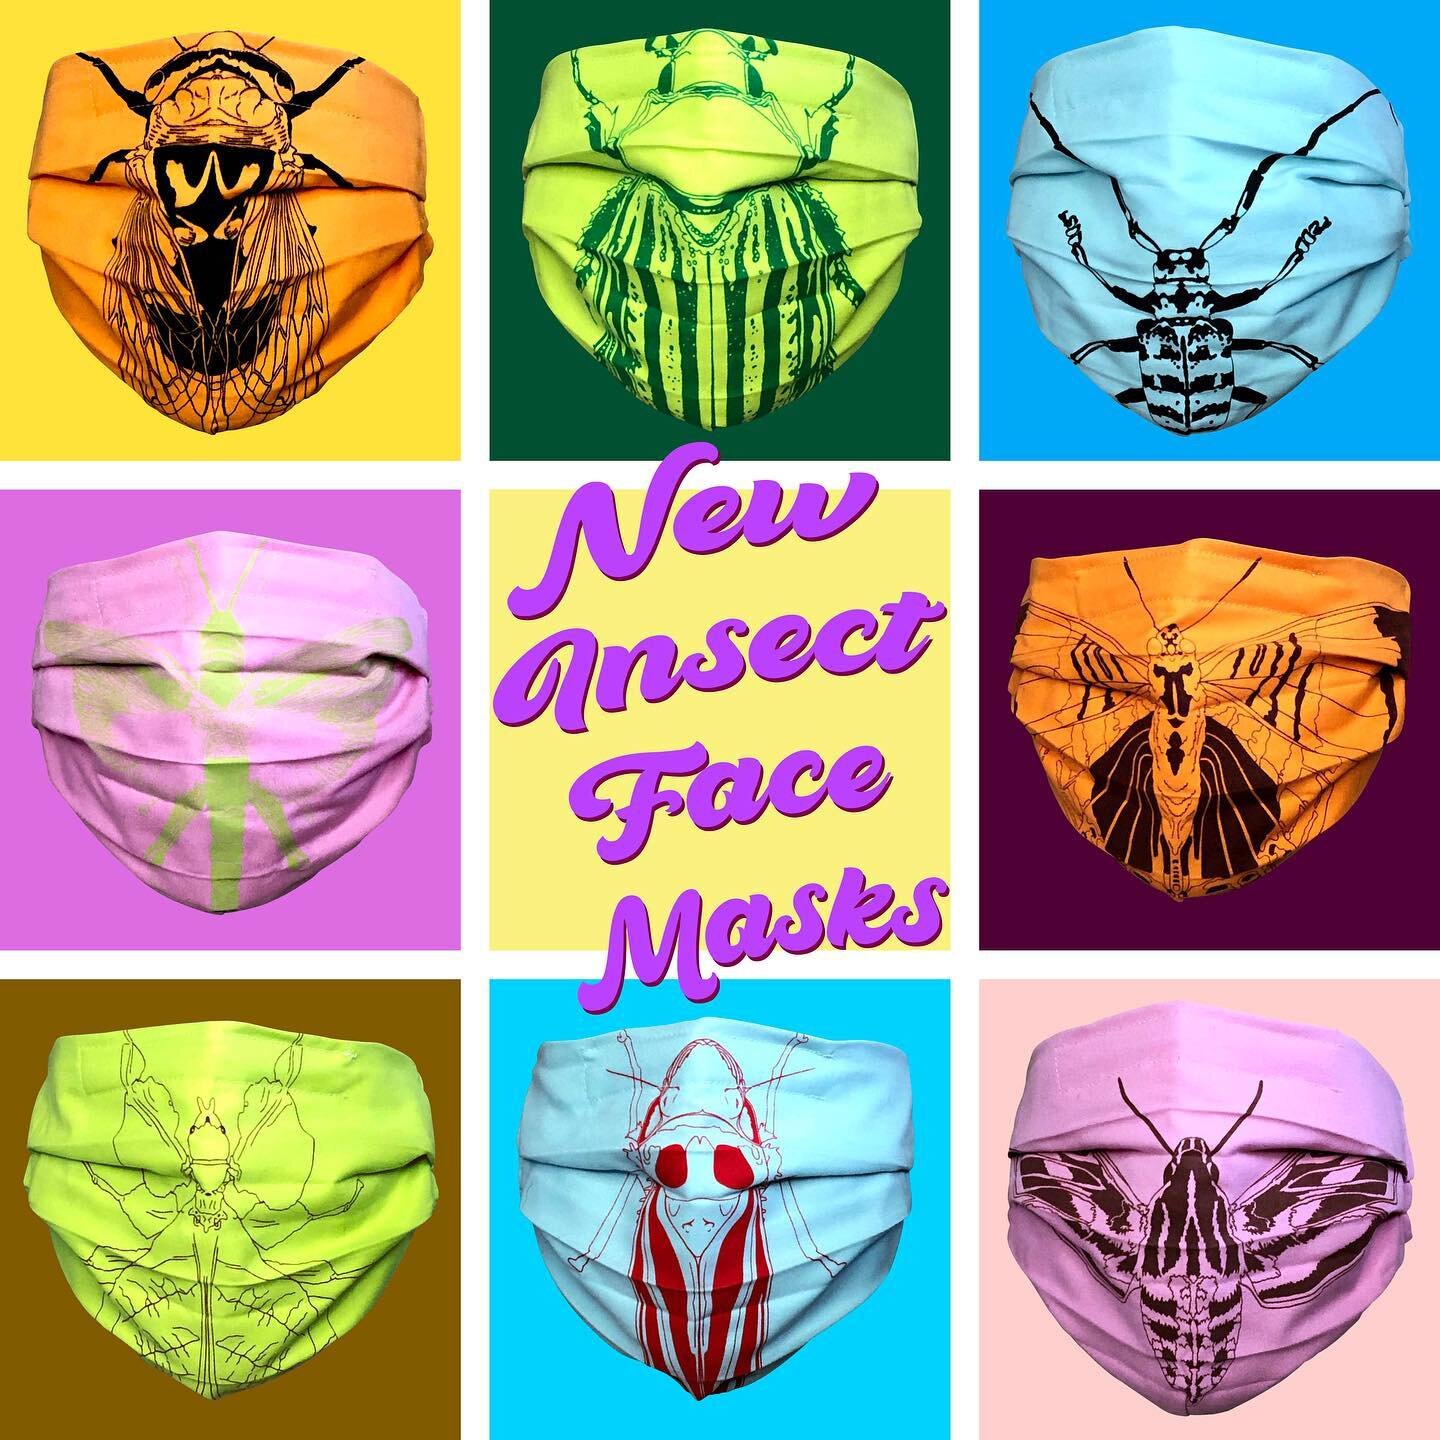 New insect masks are now available! This round includes the White-Lined Sphinx Moth, Pansy Daggerwing Butterfly, Glorious Beetle, Longhorn Beetle, Pink Grasshopper, Yellow Monday Cicada, Green Walking Leaf, and Candy-Striped Leaf Hopper!

All masks a